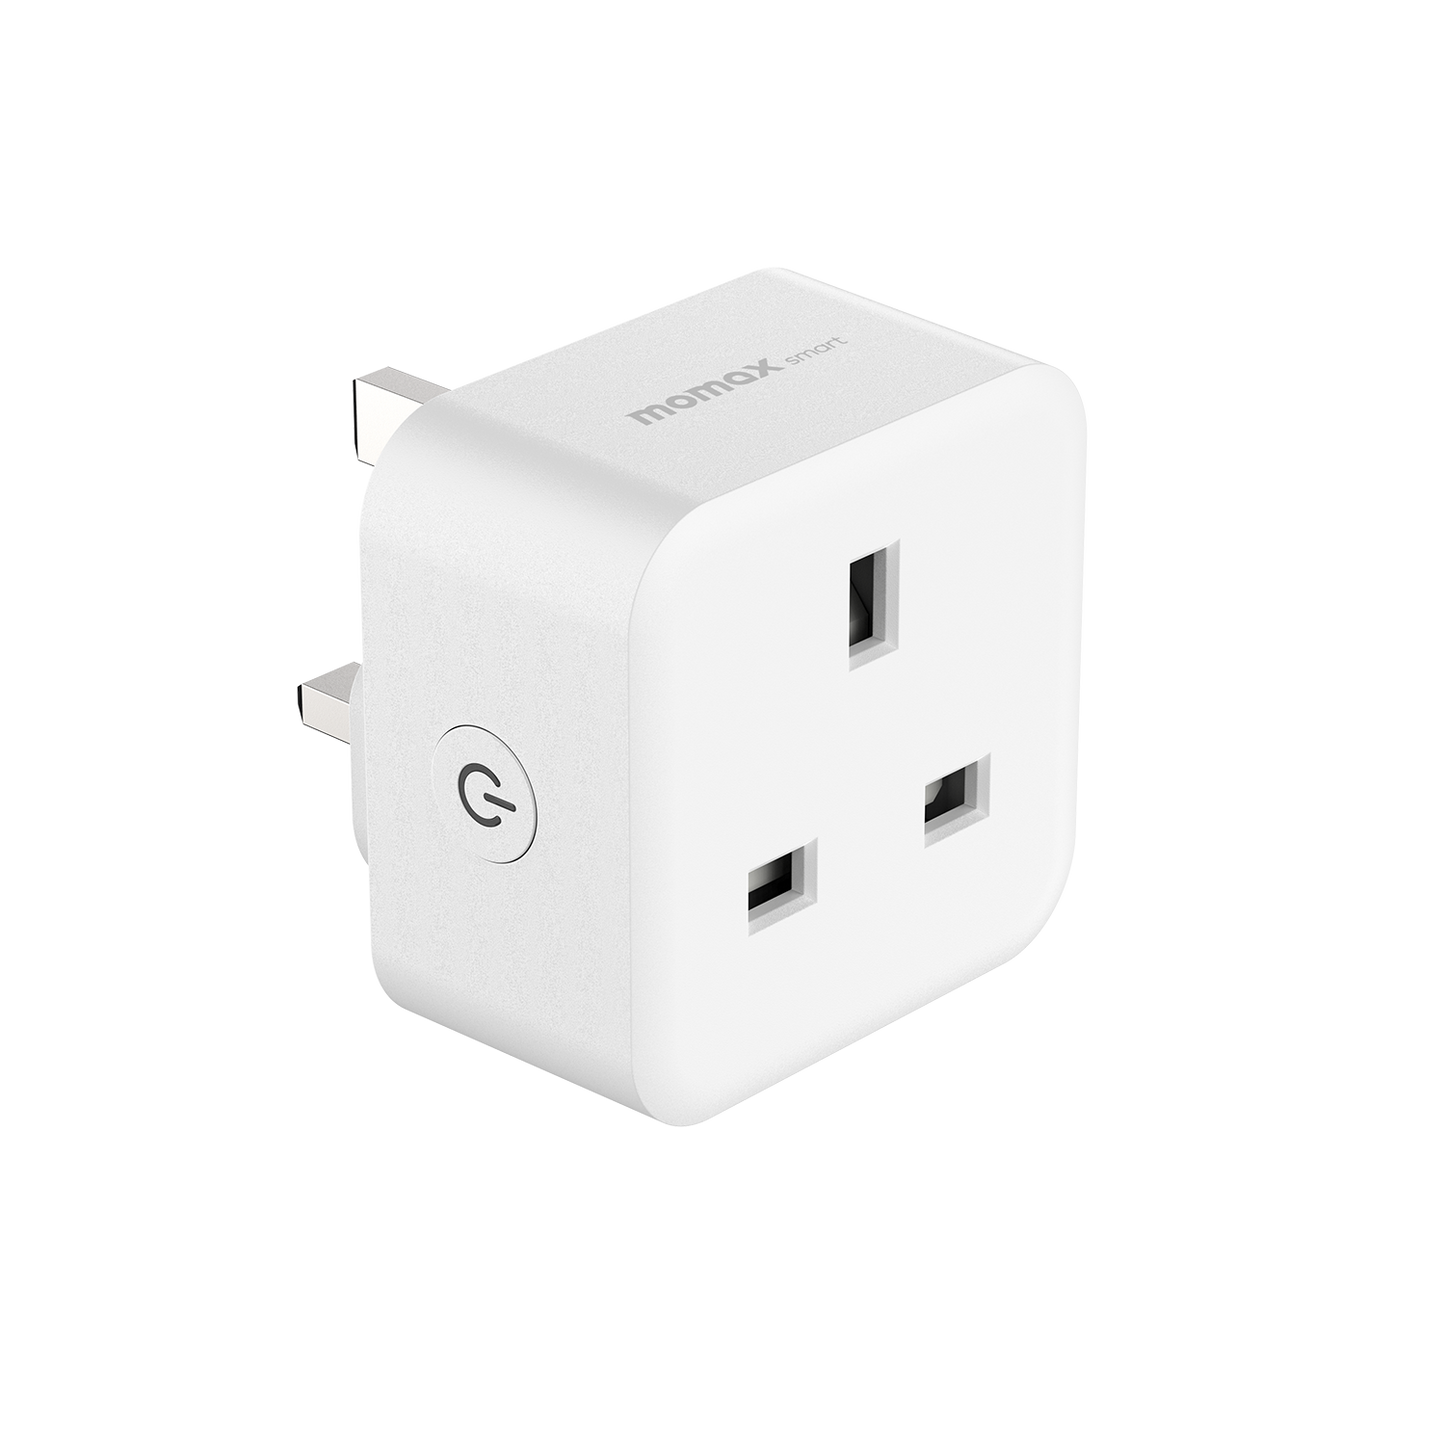 Charge Cube IoT 智能插頭 (US9S) -- 電源